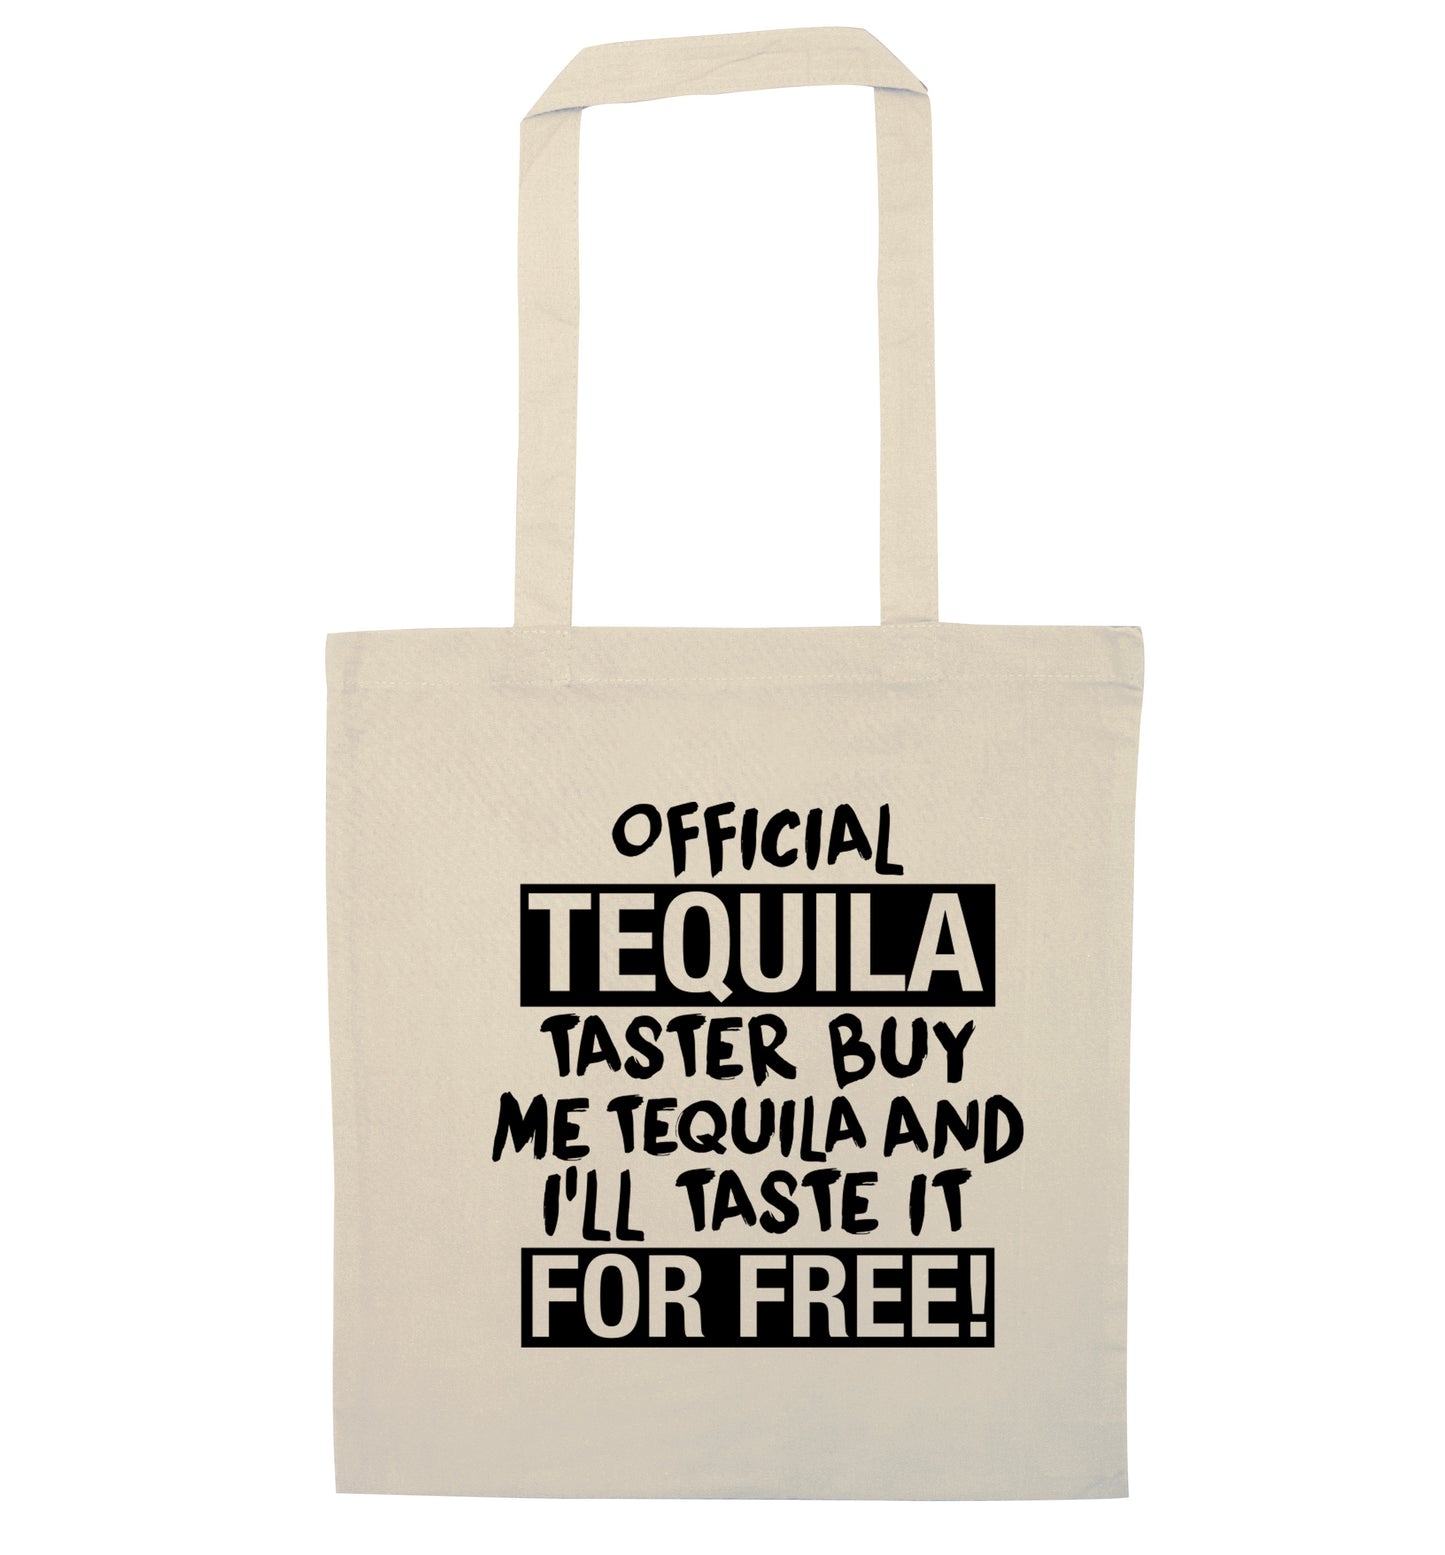 Official tequila taster buy me tequila and I'll taste it for free natural tote bag